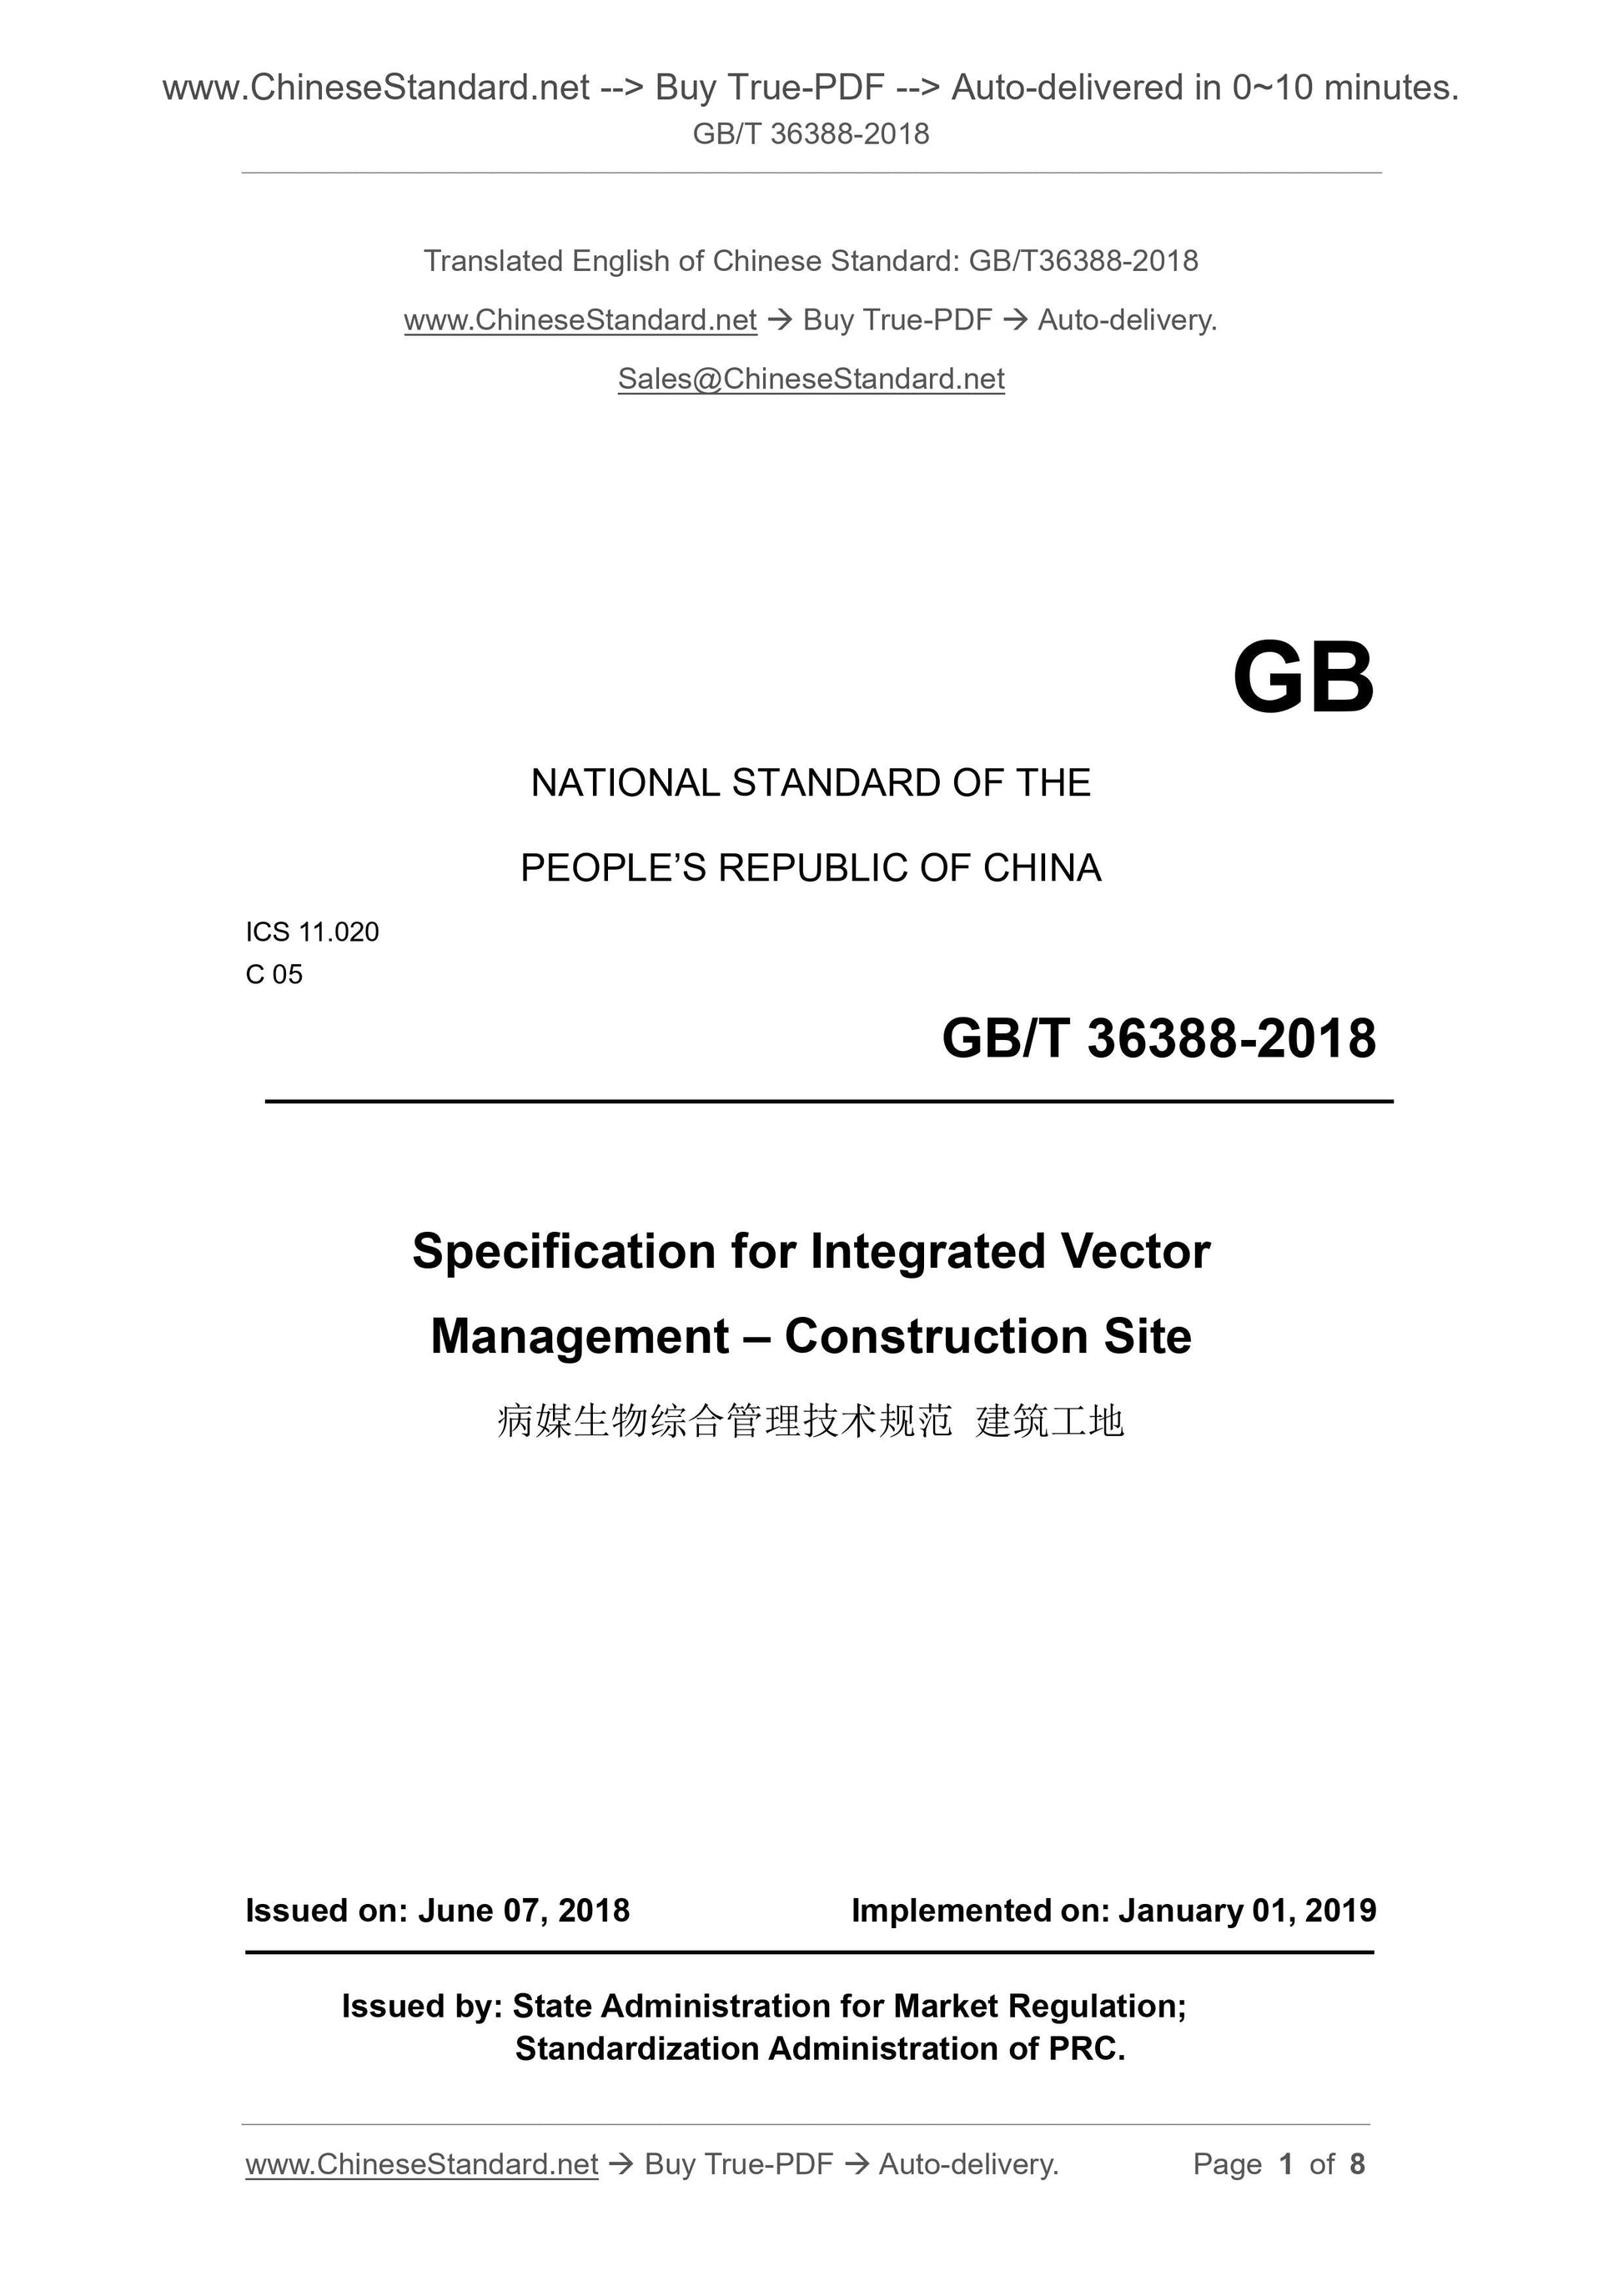 GB/T 36388-2018 Page 1